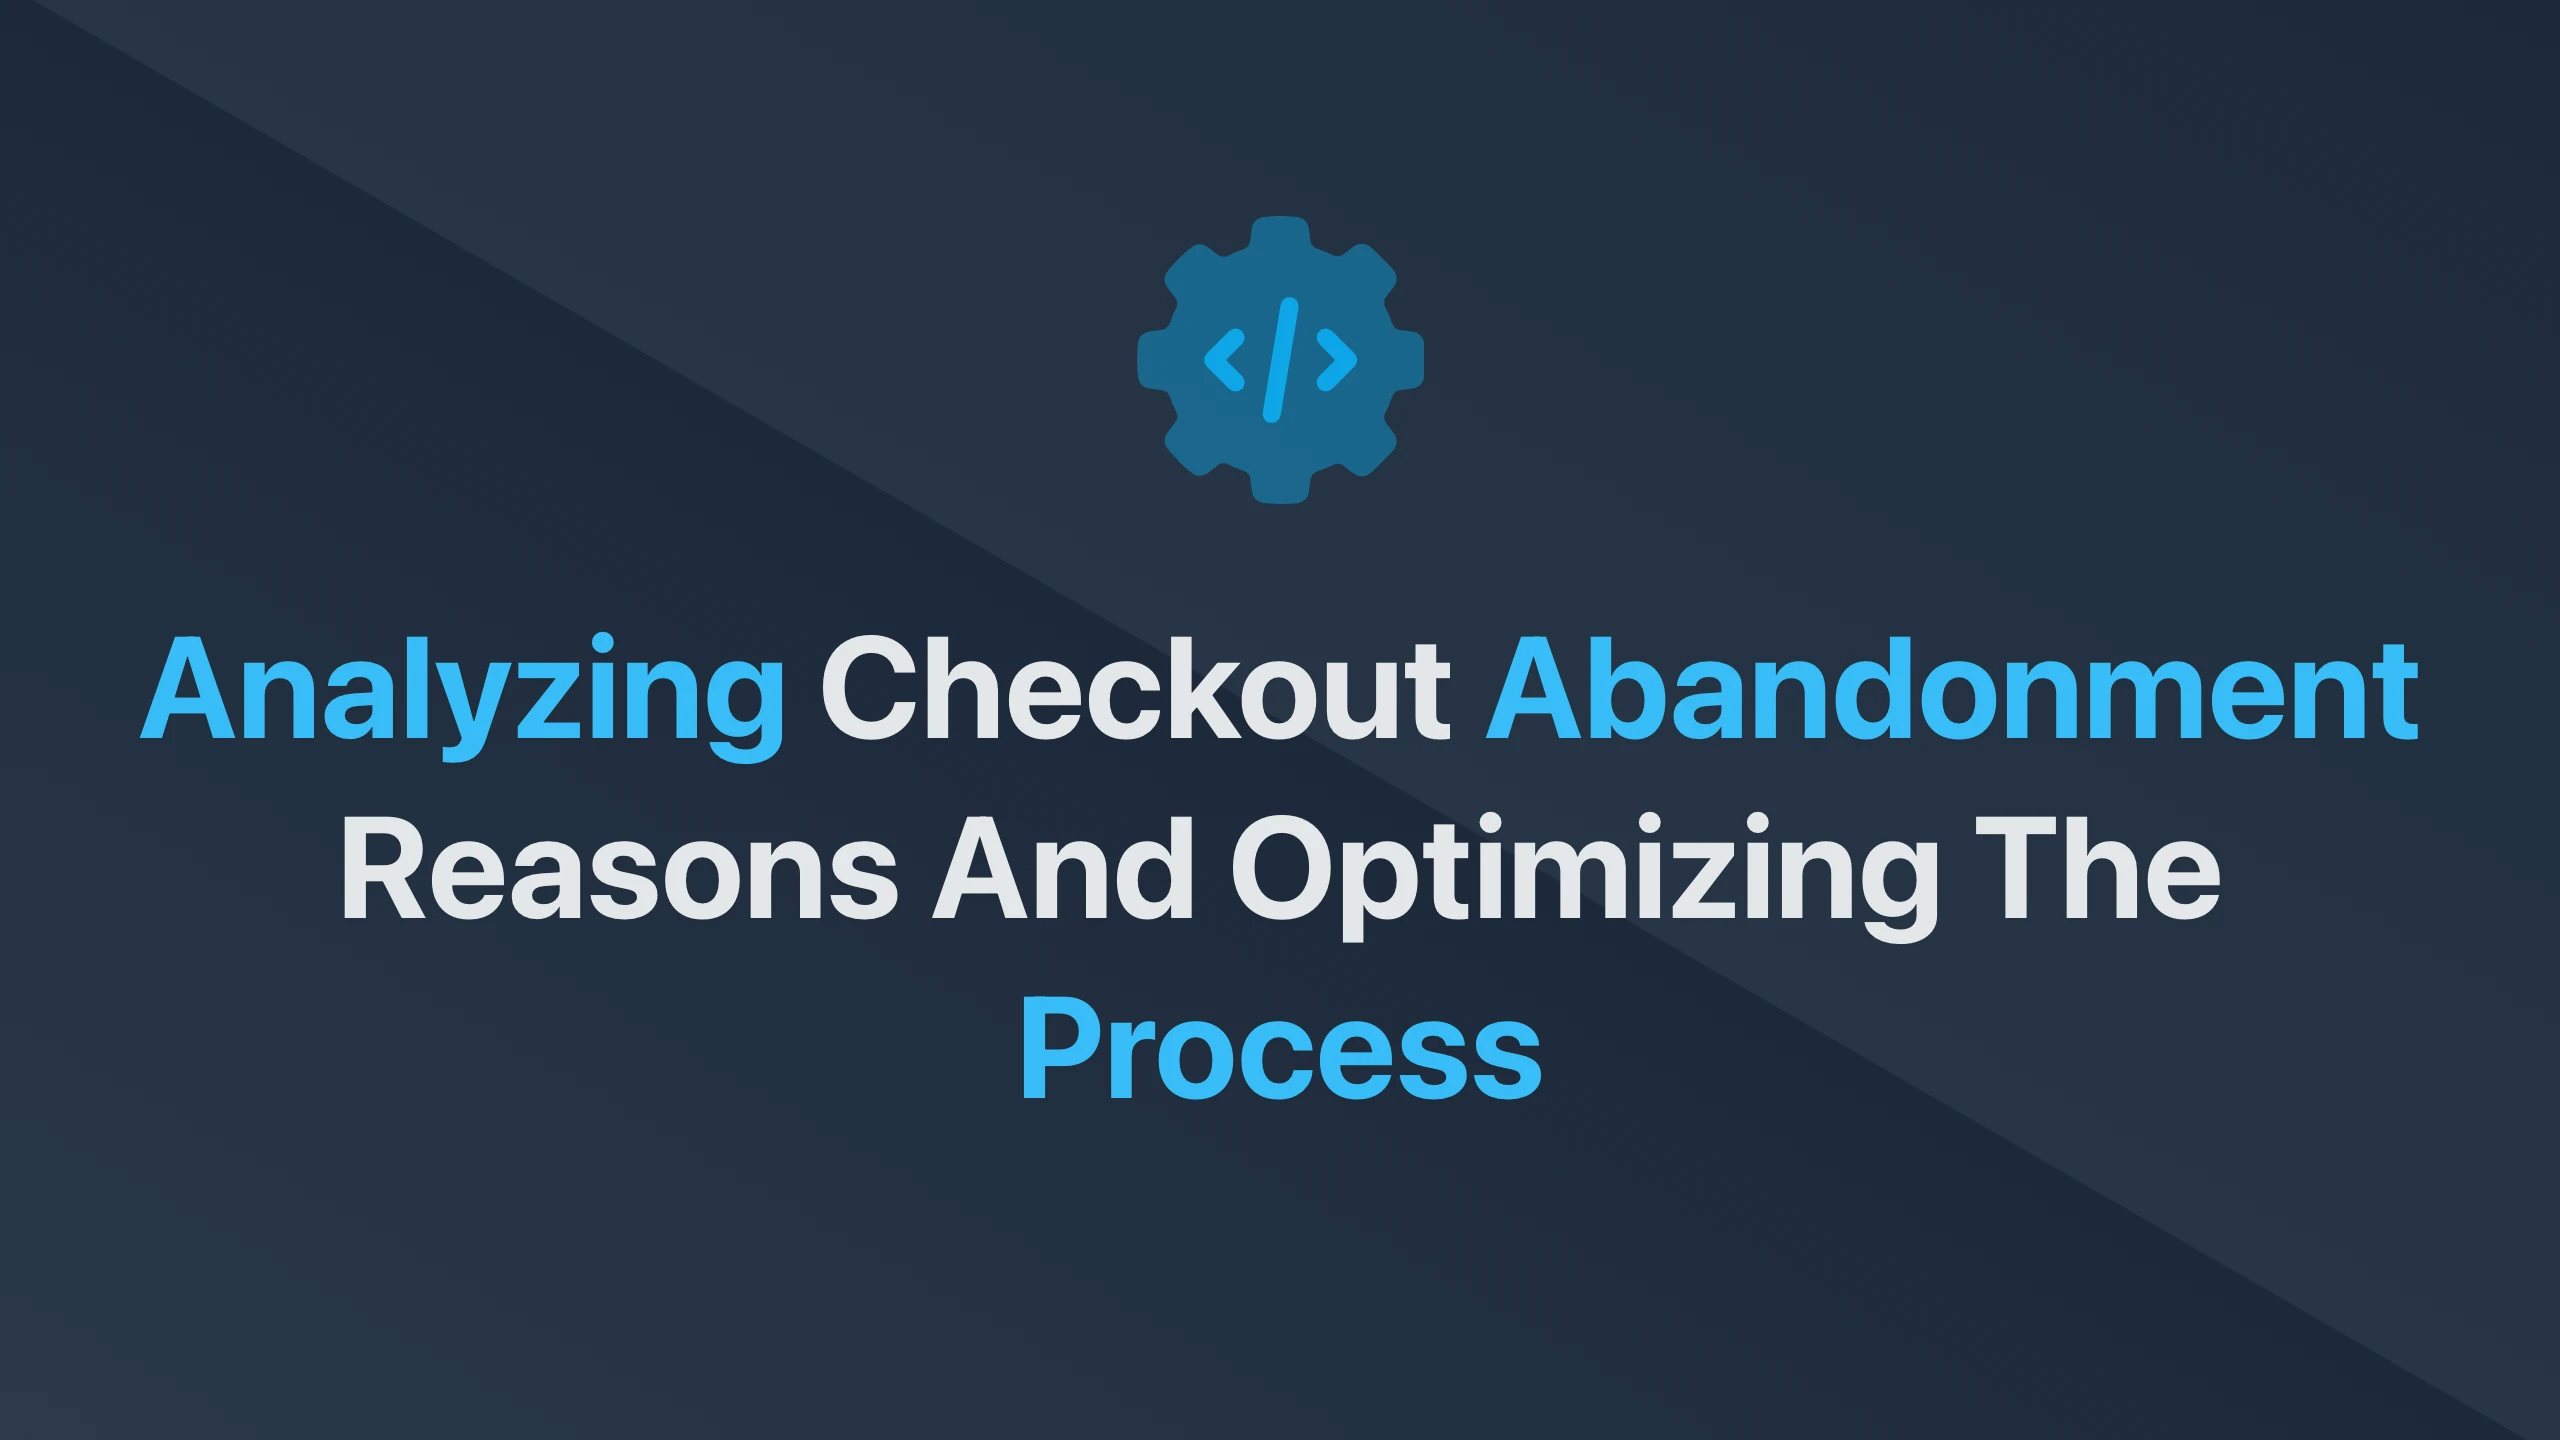 Cover Image for Analyzing Checkout Abandonment Reasons and Optimizing the Process